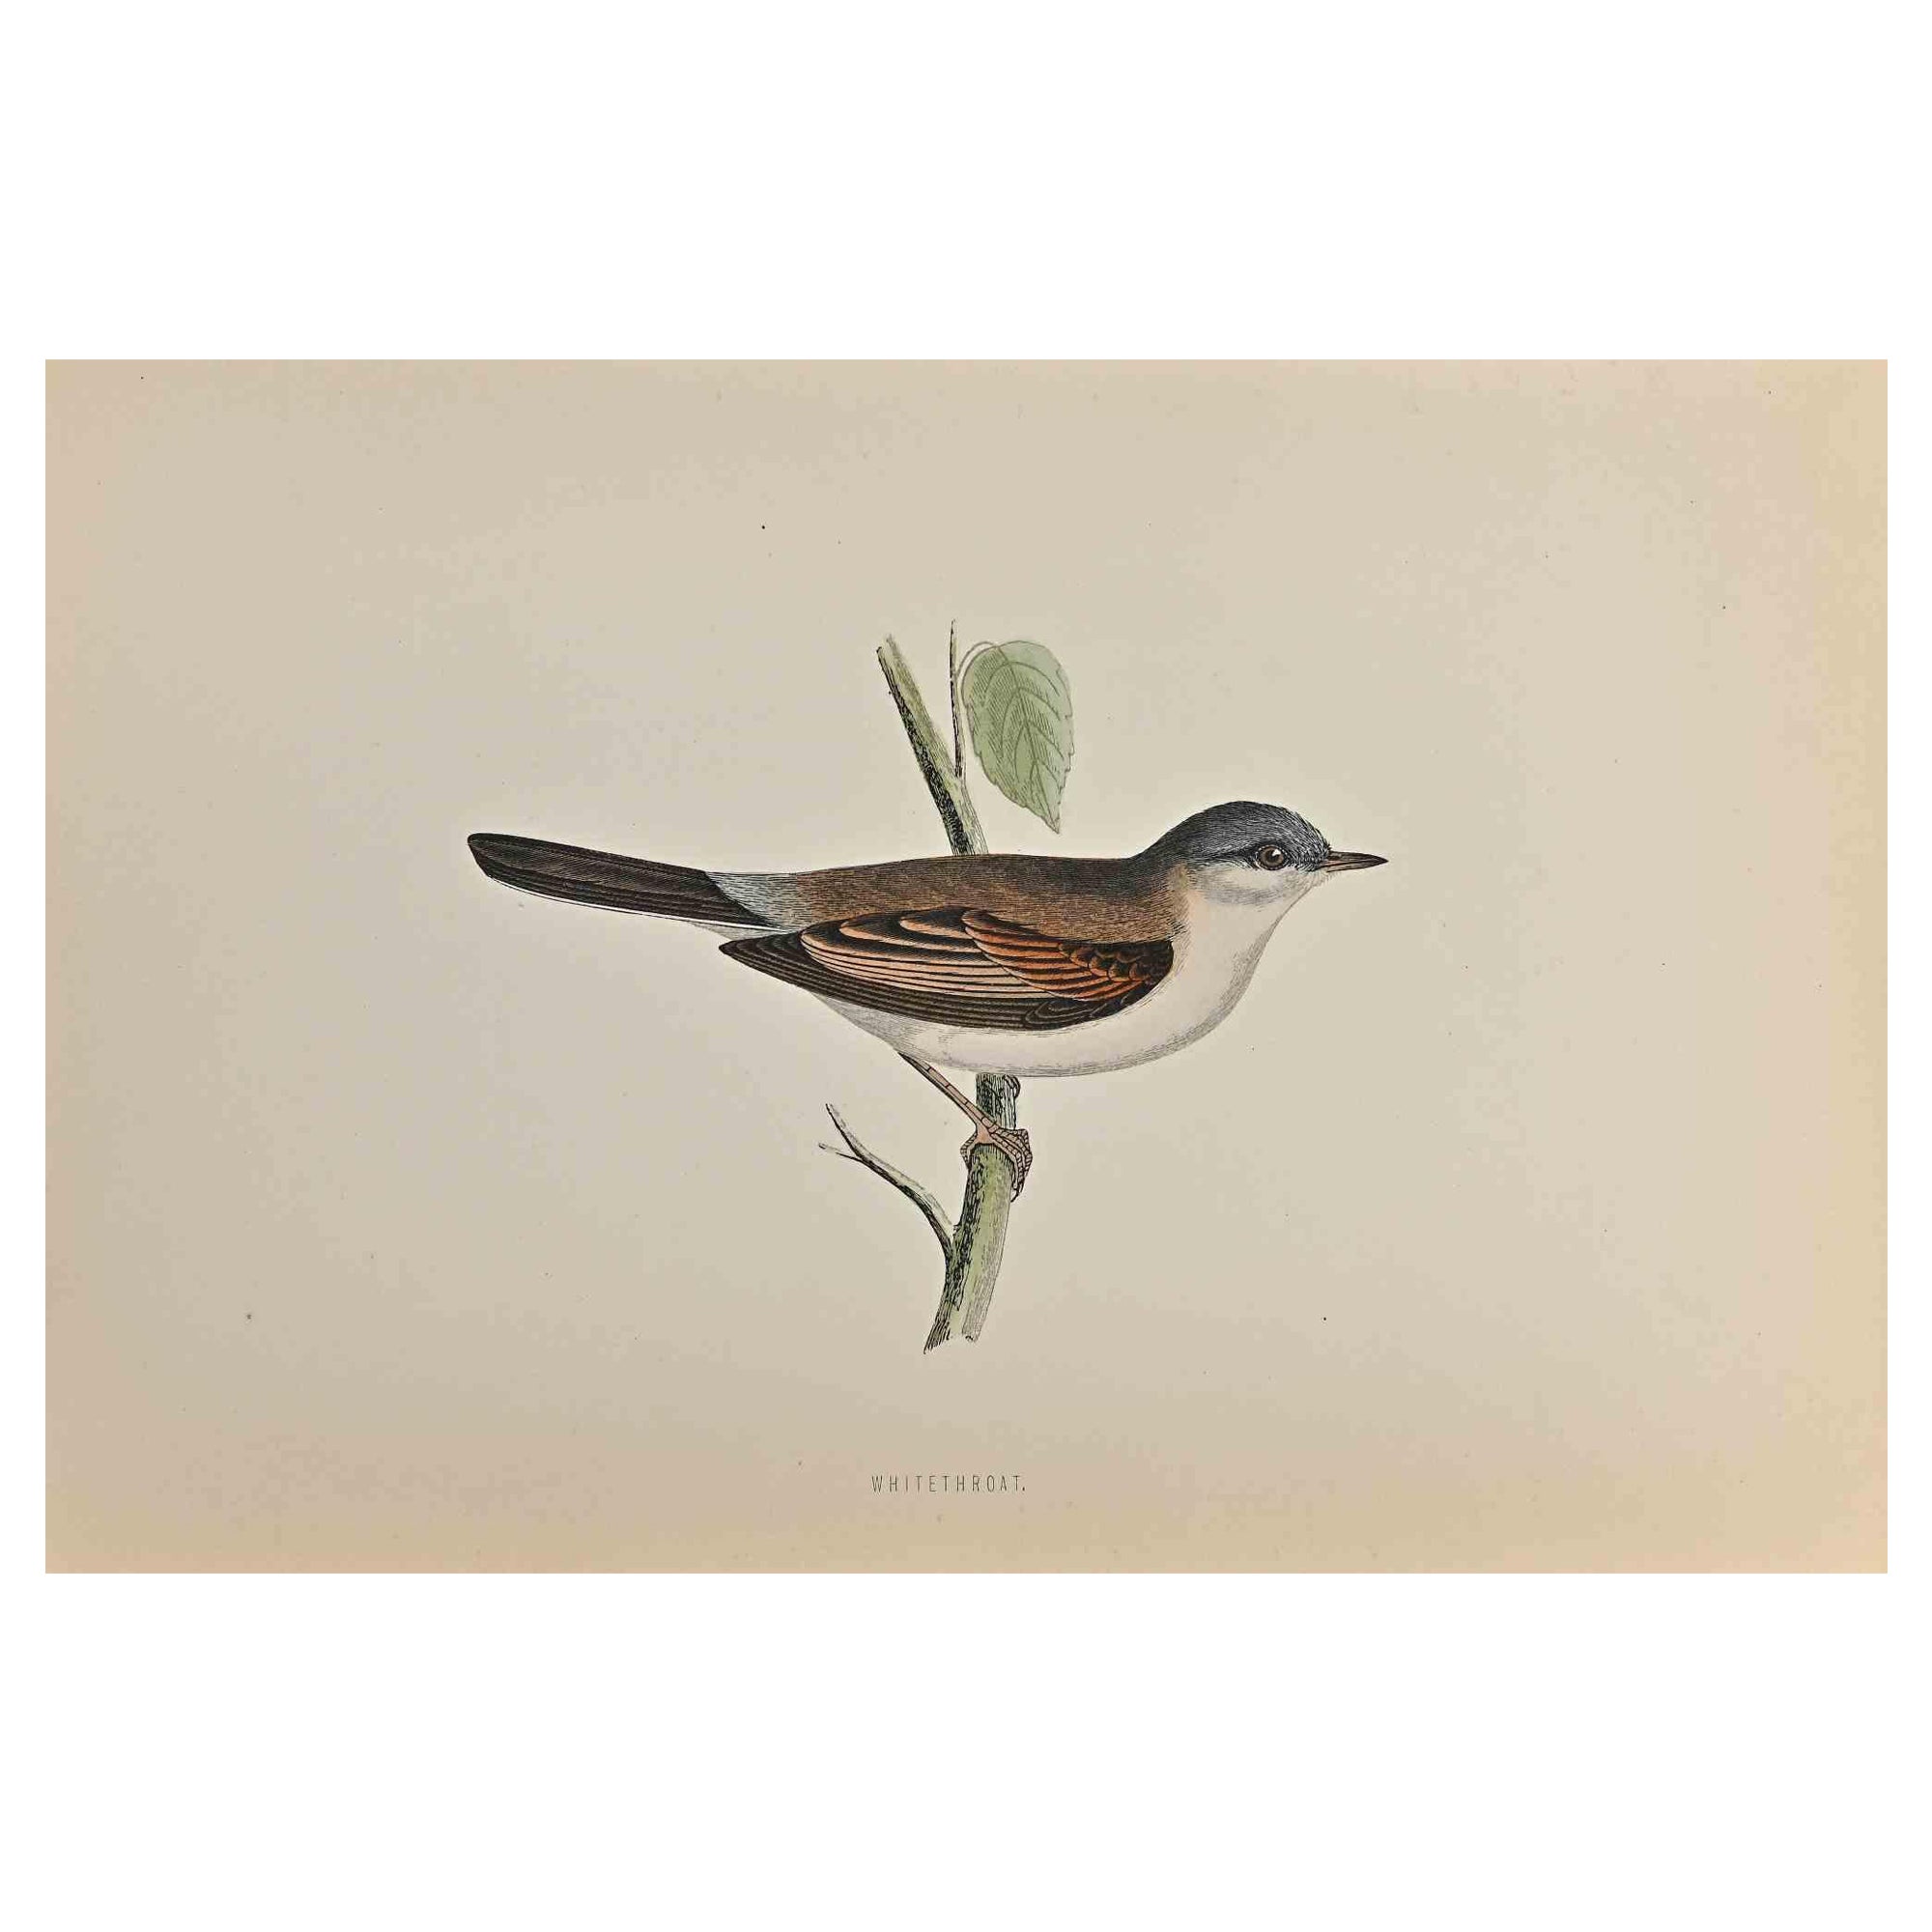 Whitethroat is a modern artwork realized in 1870 by the British artist Alexander Francis Lydon (1836-1917) . 

Woodcut print, hand colored, published by London, Bell & Sons, 1870.  Name of the bird printed in plate. This work is part of a print